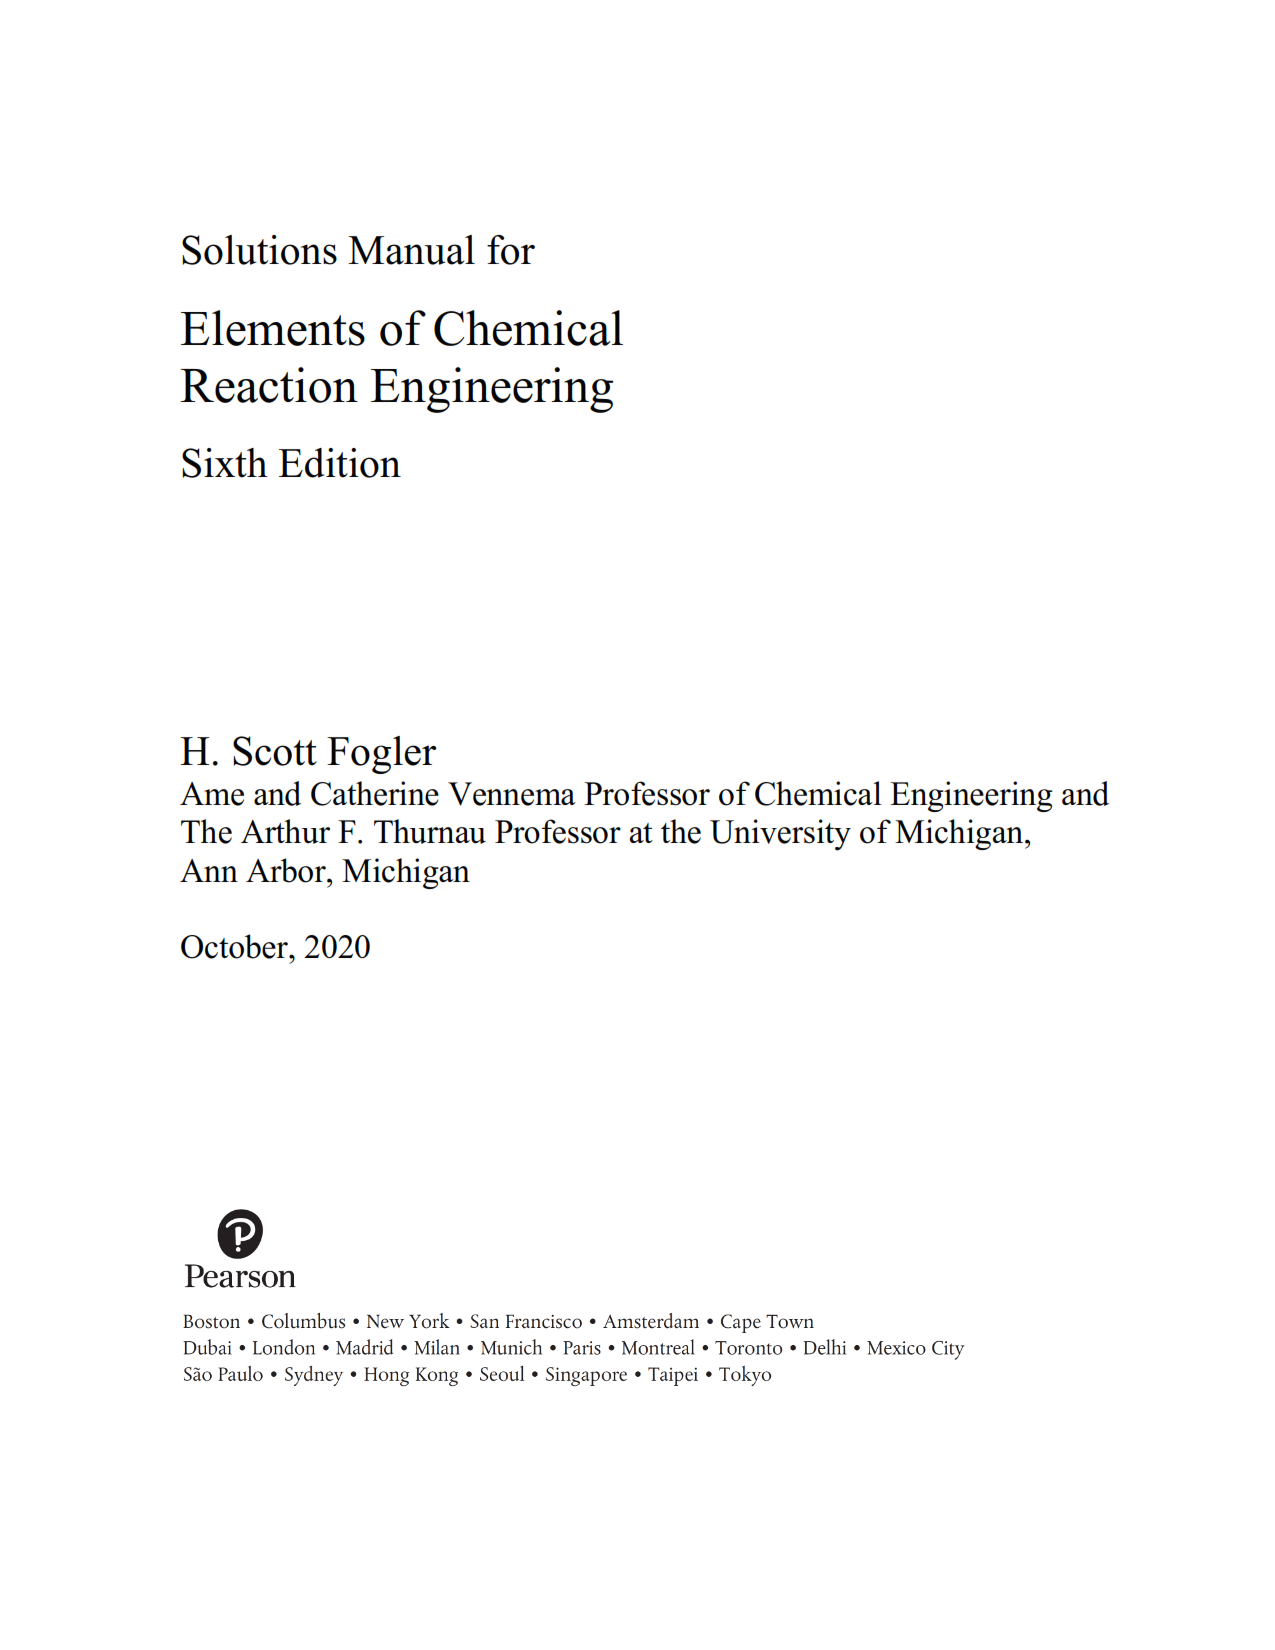 Download free elements of chemical reaction engineering 5th , 6th edition H. Scott Fogler solution manual pdf | solutions 3rd , 4th